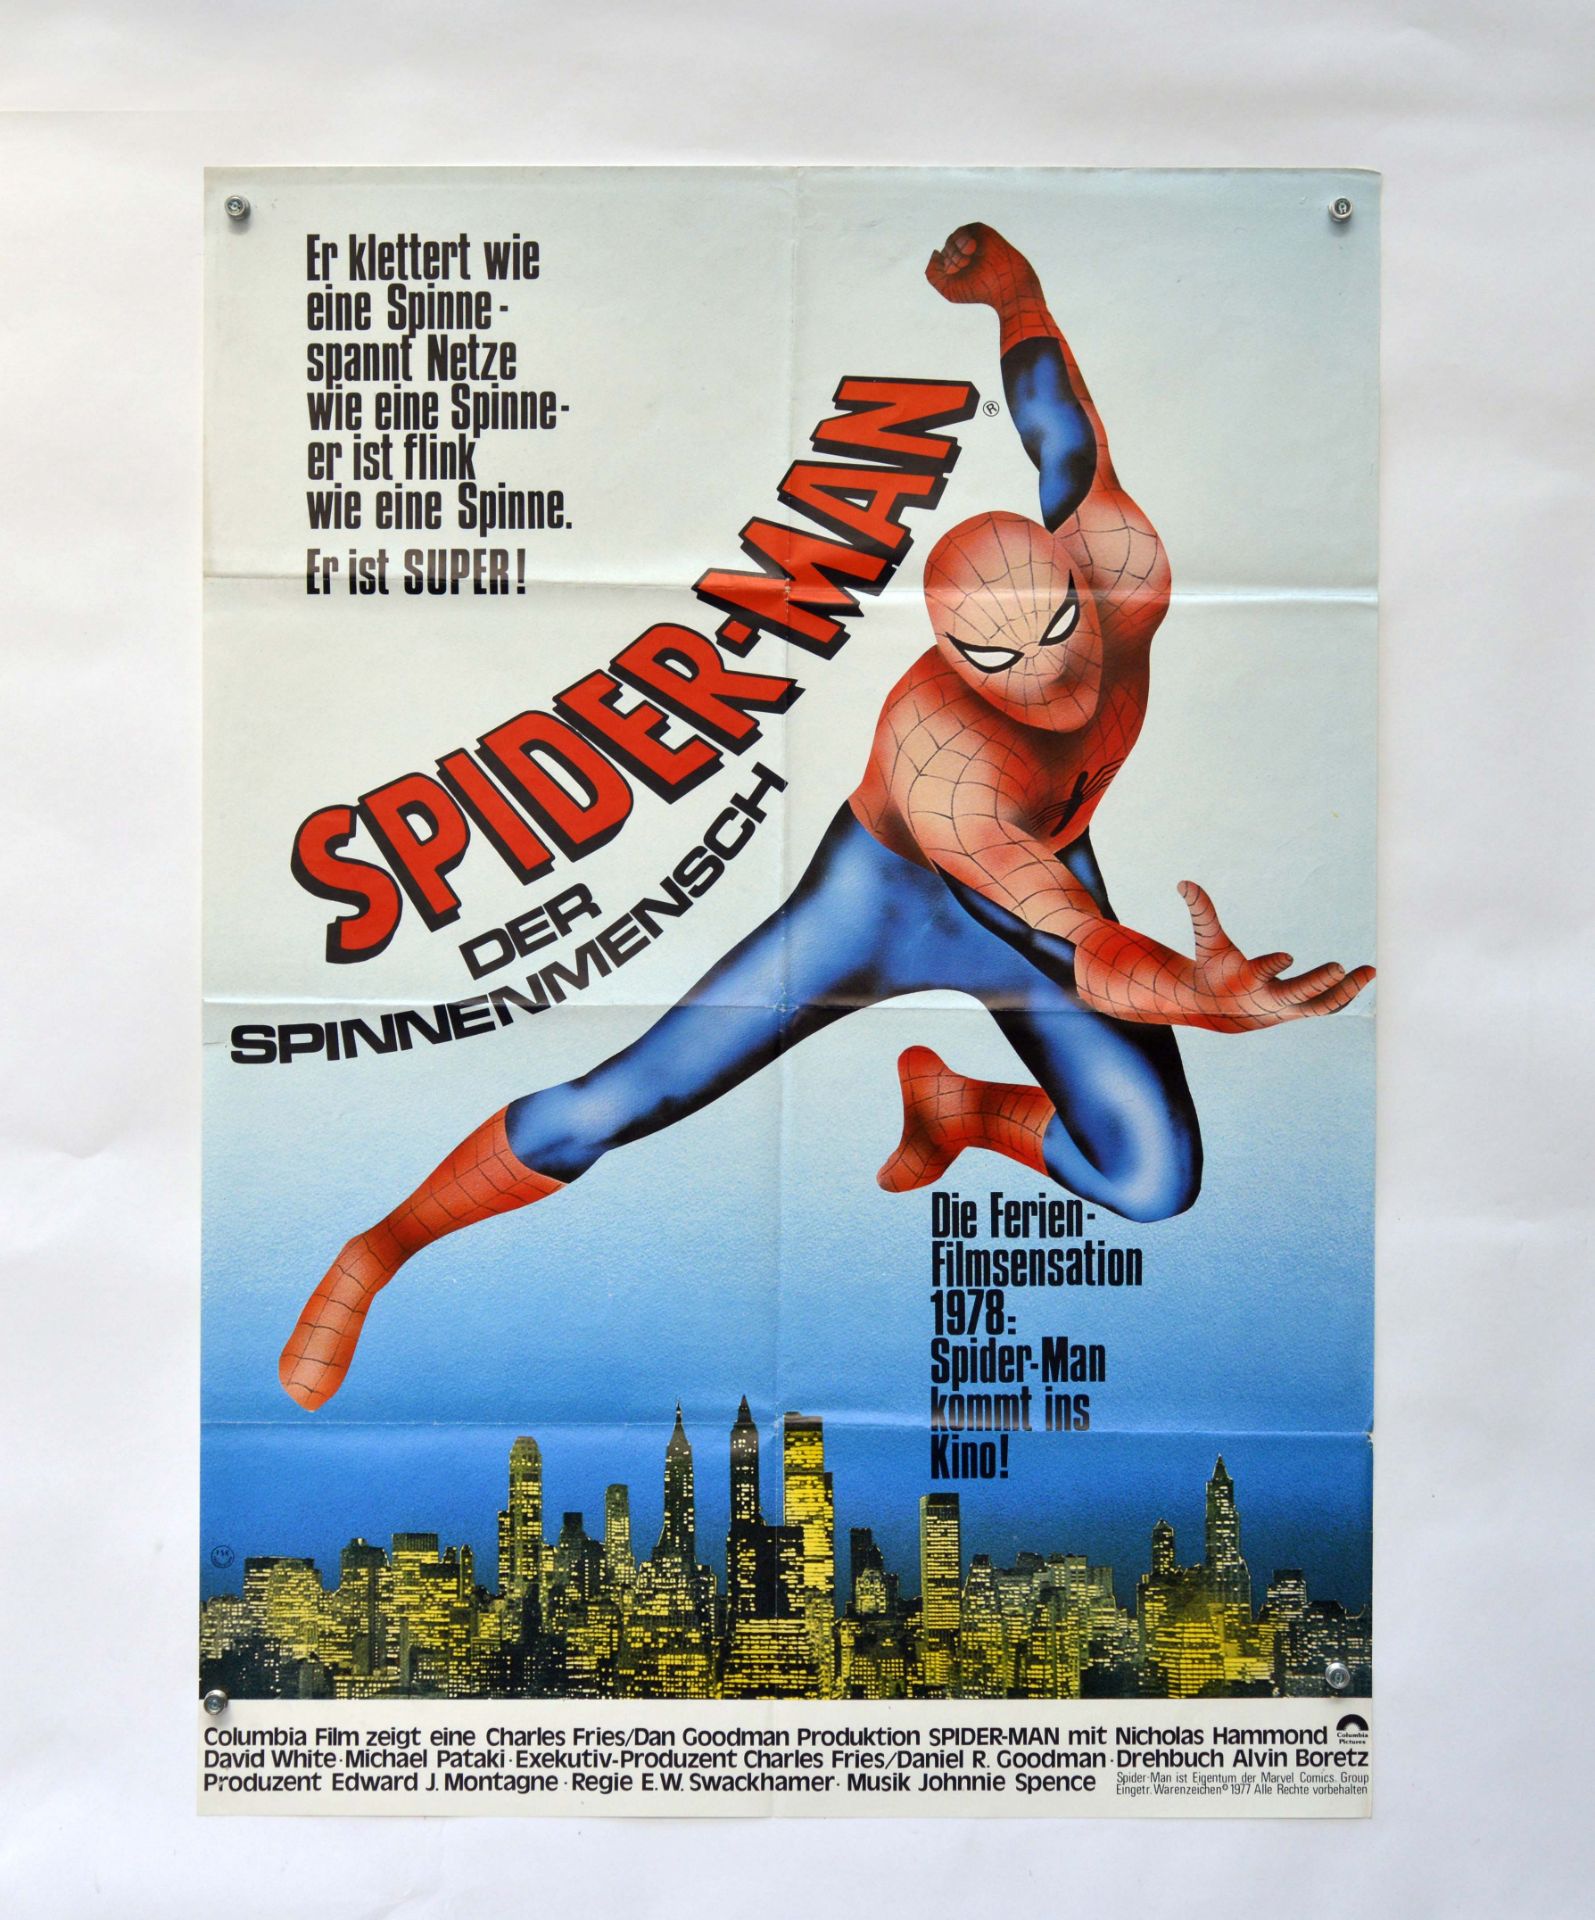 Film Poster Filmplakat "Spiderman", folds, pinholes, otherwise good condition